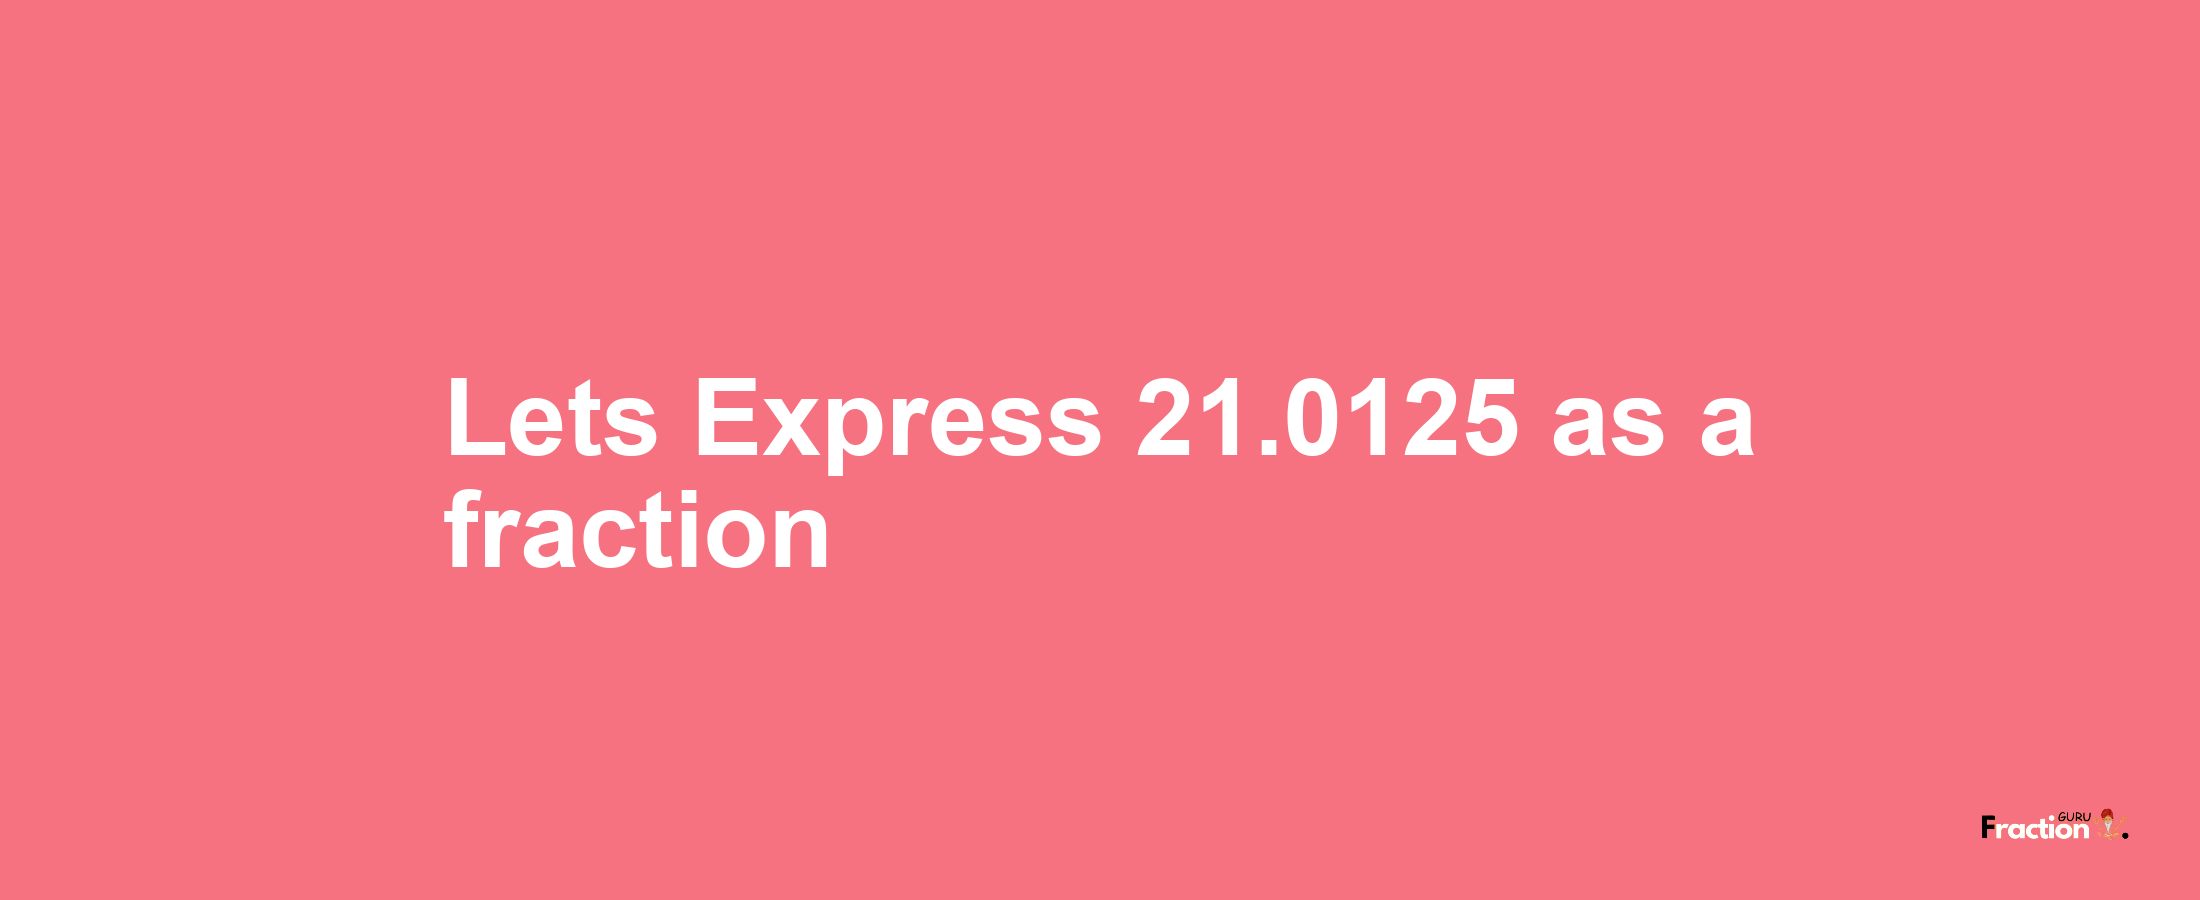 Lets Express 21.0125 as afraction